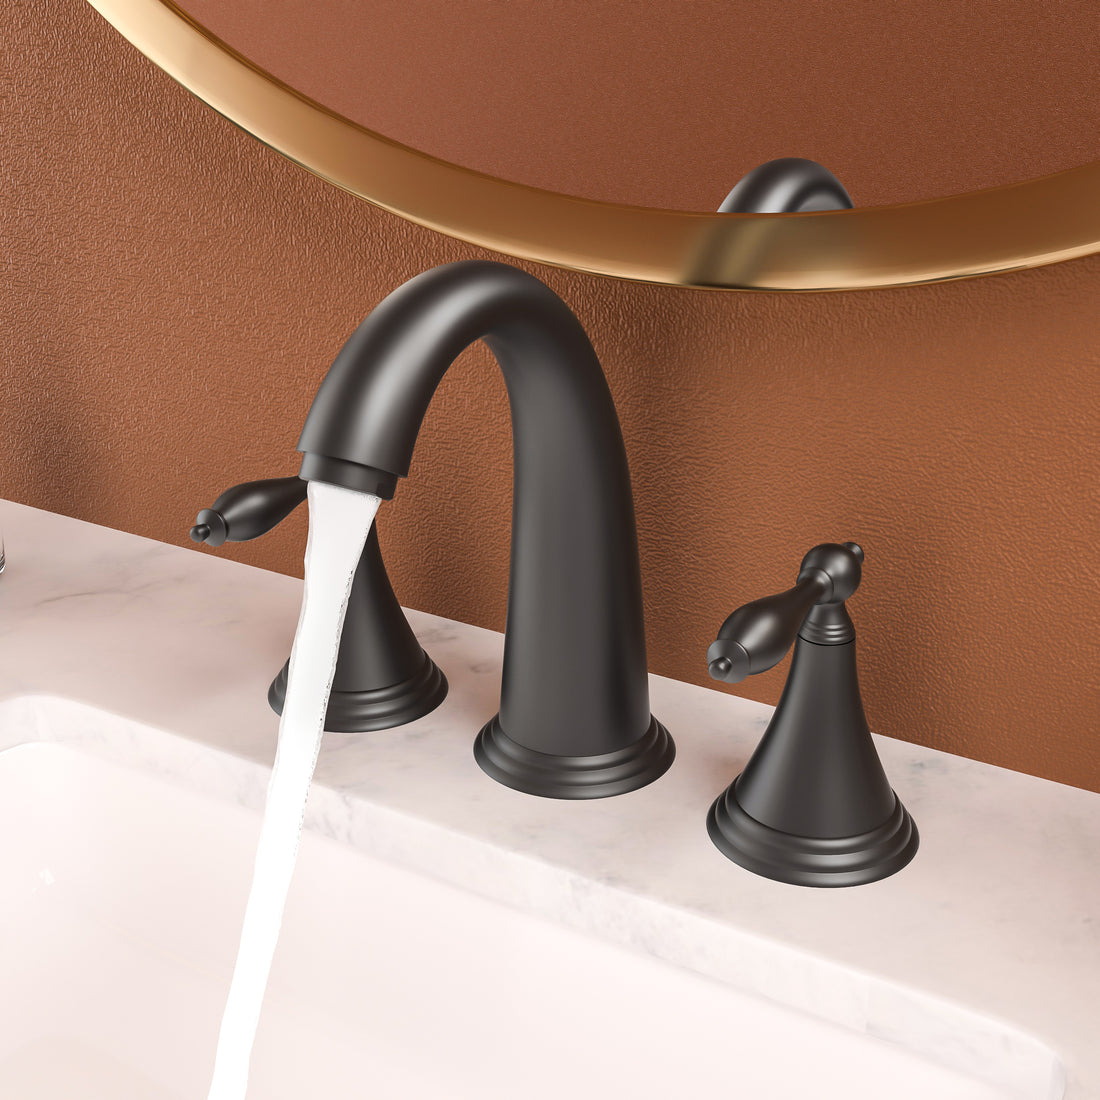 2 Handle Widespread Bathroom Faucet 3 Hole, with Pop matte black-stainless steel